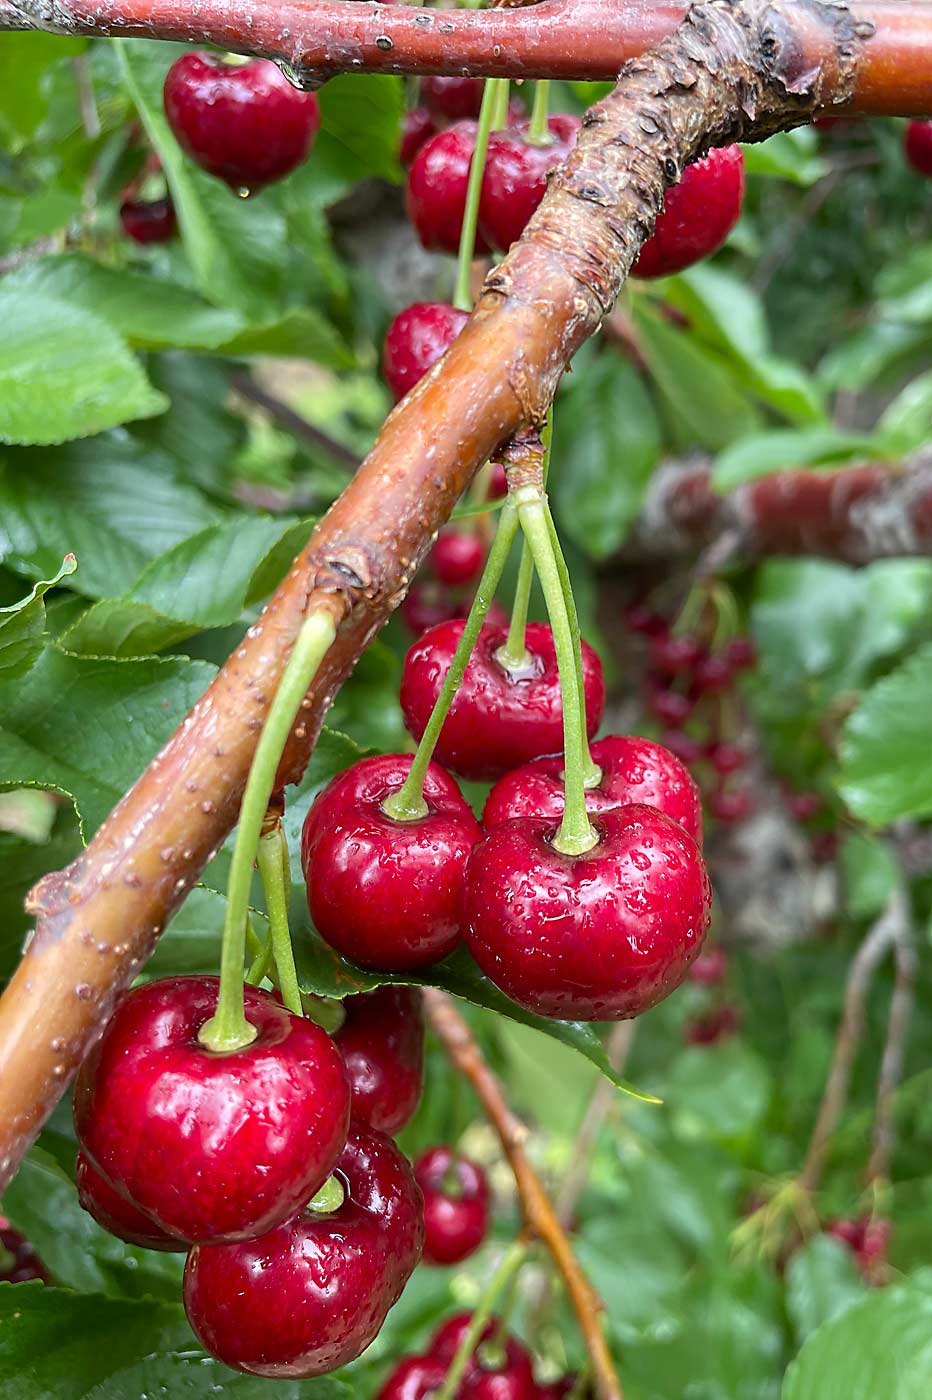 Closer to harvest, cherries are susceptible to rain events, absorbing water that can cause them to split. (Courtesy Jennifer Wiggs)